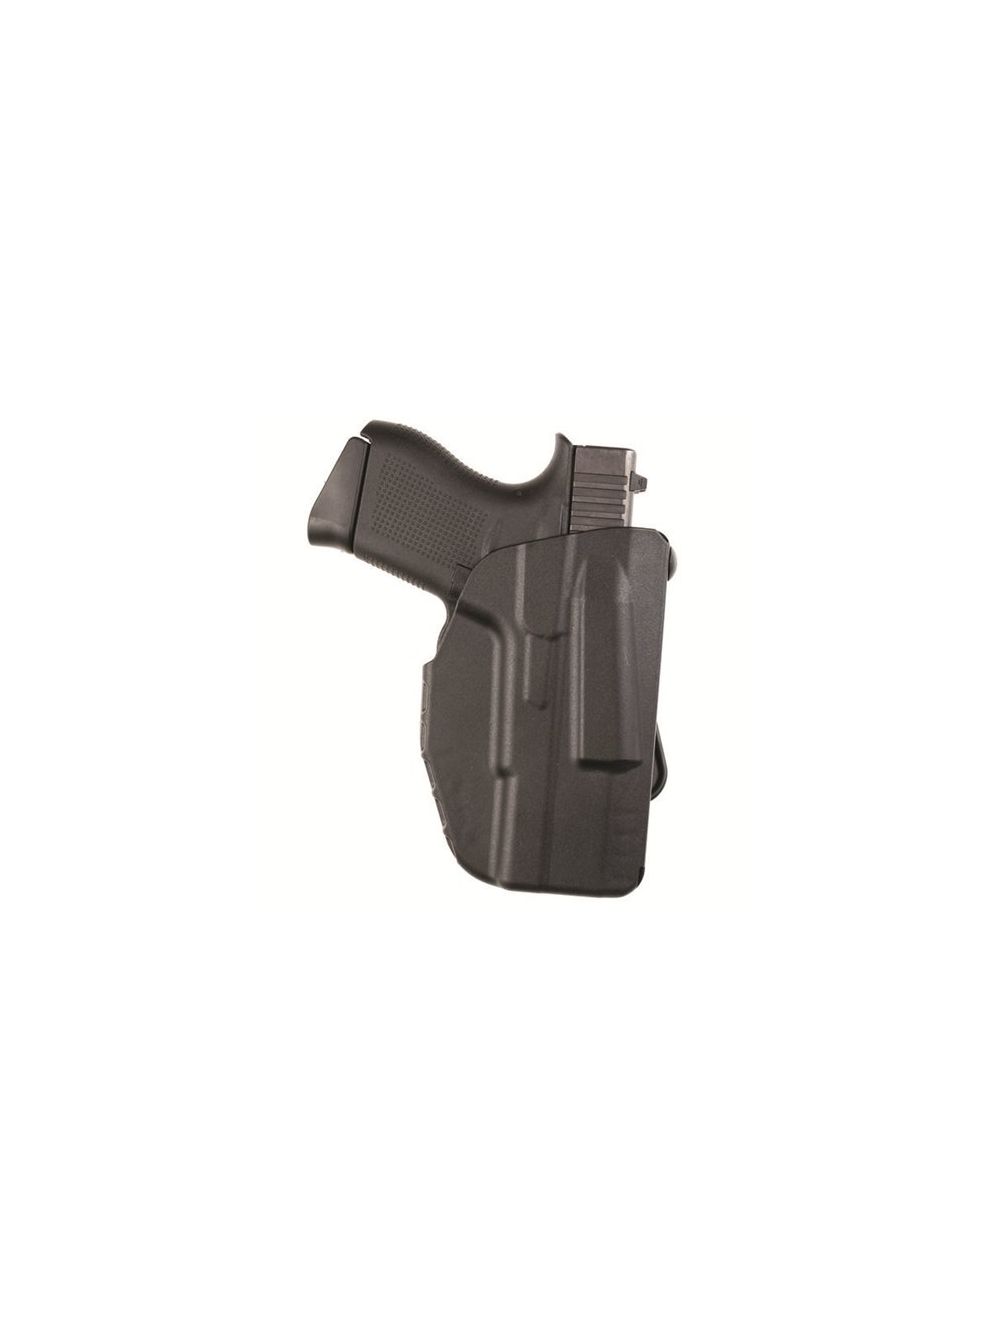 Model 7371 7TS ALS Concealment Paddle Holster for Sig Sauer P365